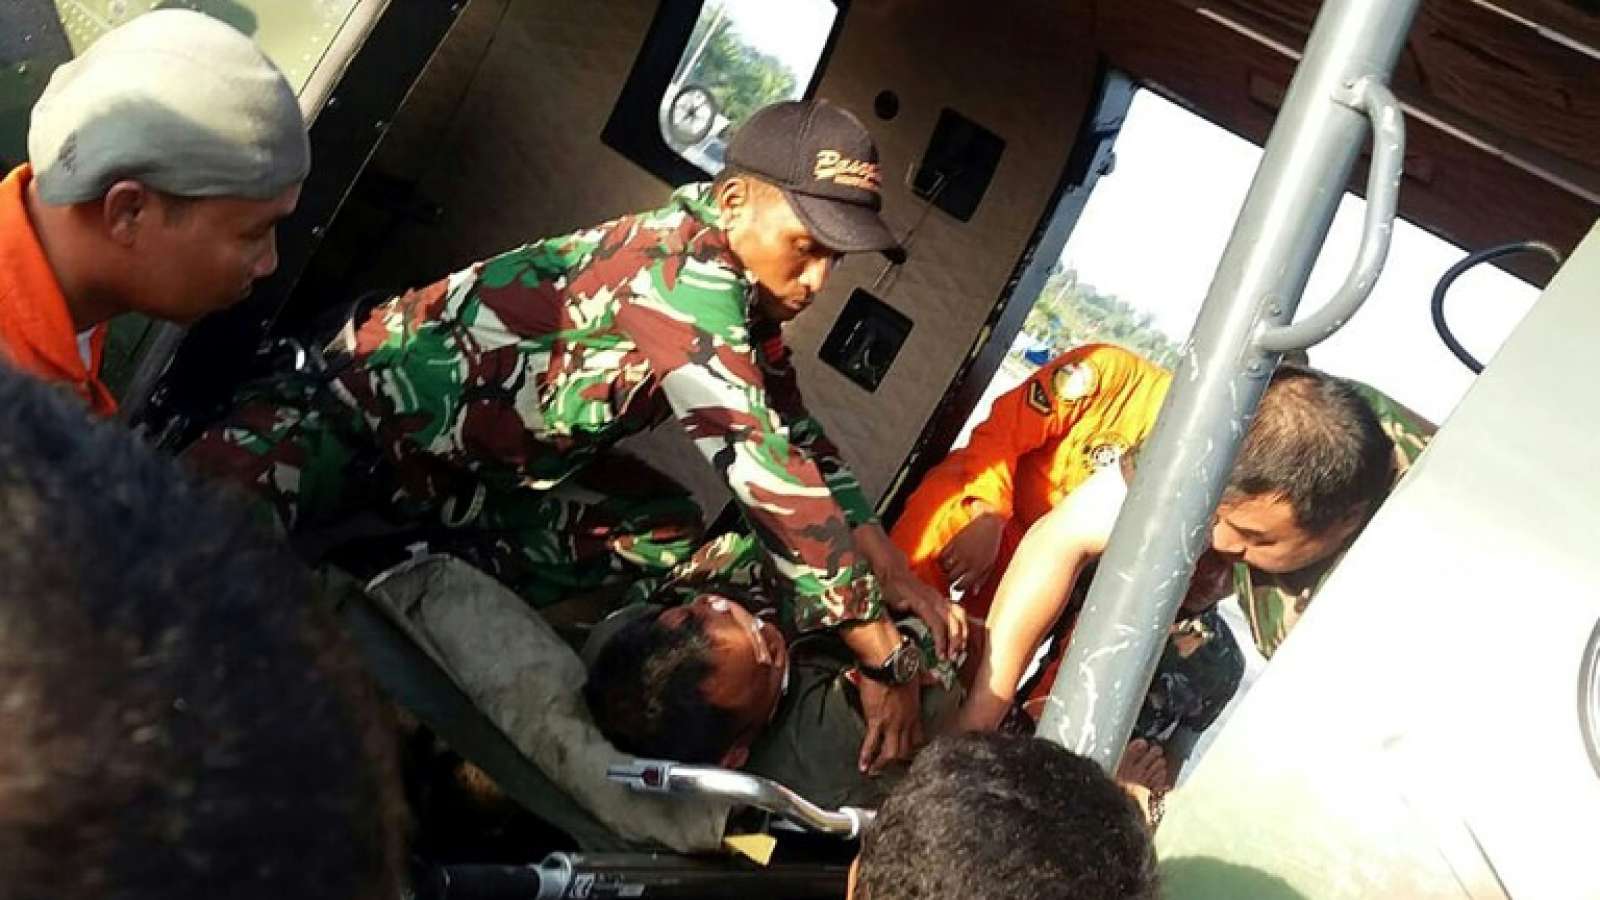 A soldier aboard a military helicopter that crashed in remote Indonesian jungle two weeks ago has been found alive, an army spokesman said Friday..